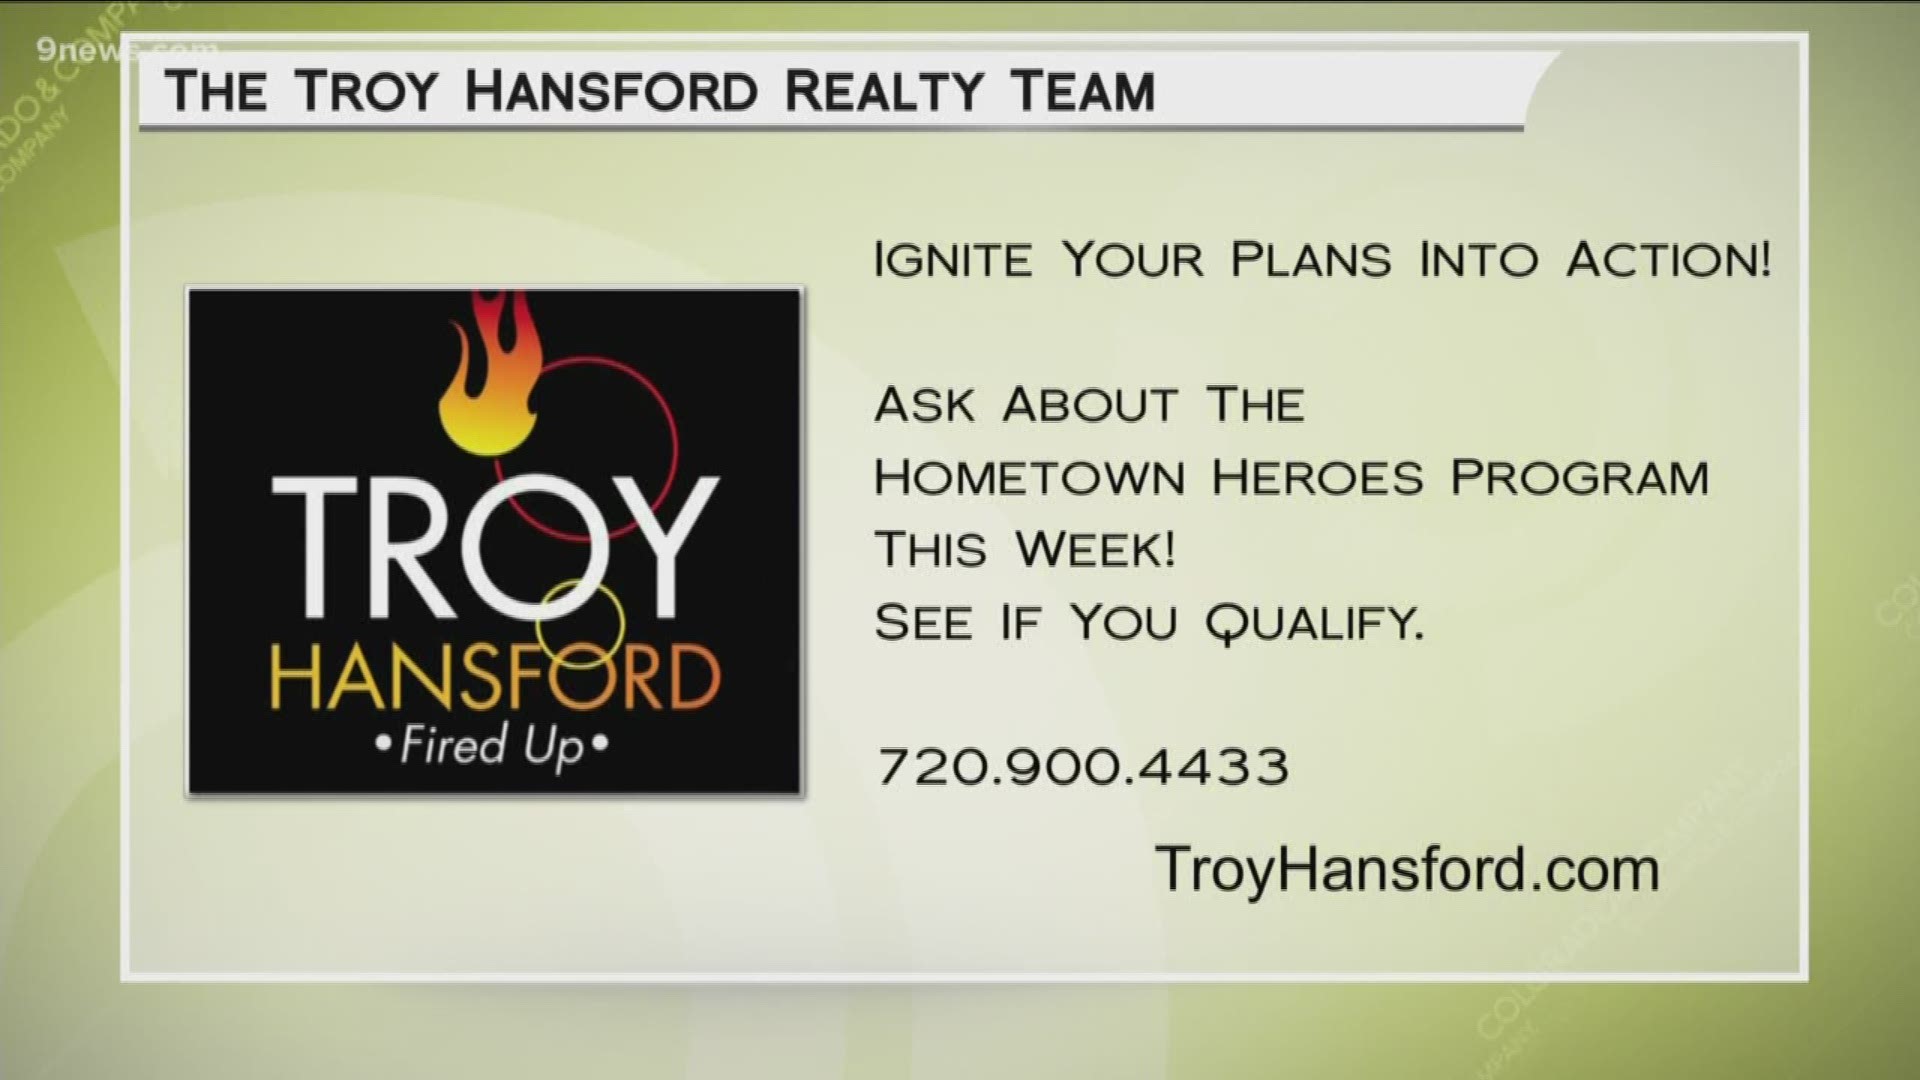 Call the Troy Hansford team to see if you could benefit from the Hometown Heroes program. Call 720.900.4433, or learn more at www.TroyHansford.com.